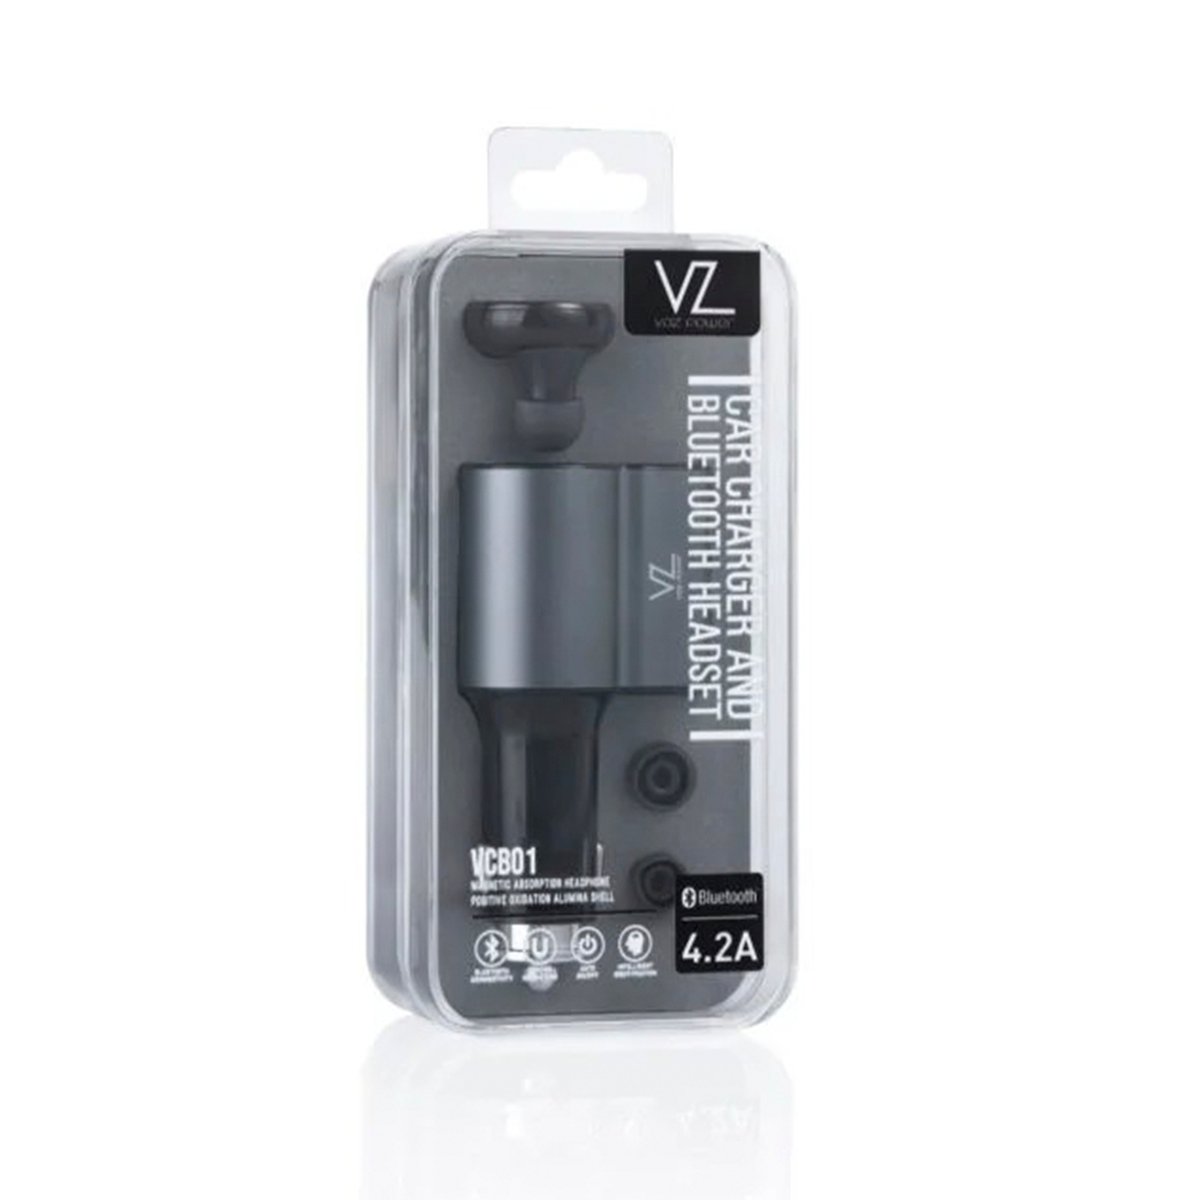 Voz Car Charger Adapter Grey (VCB01)